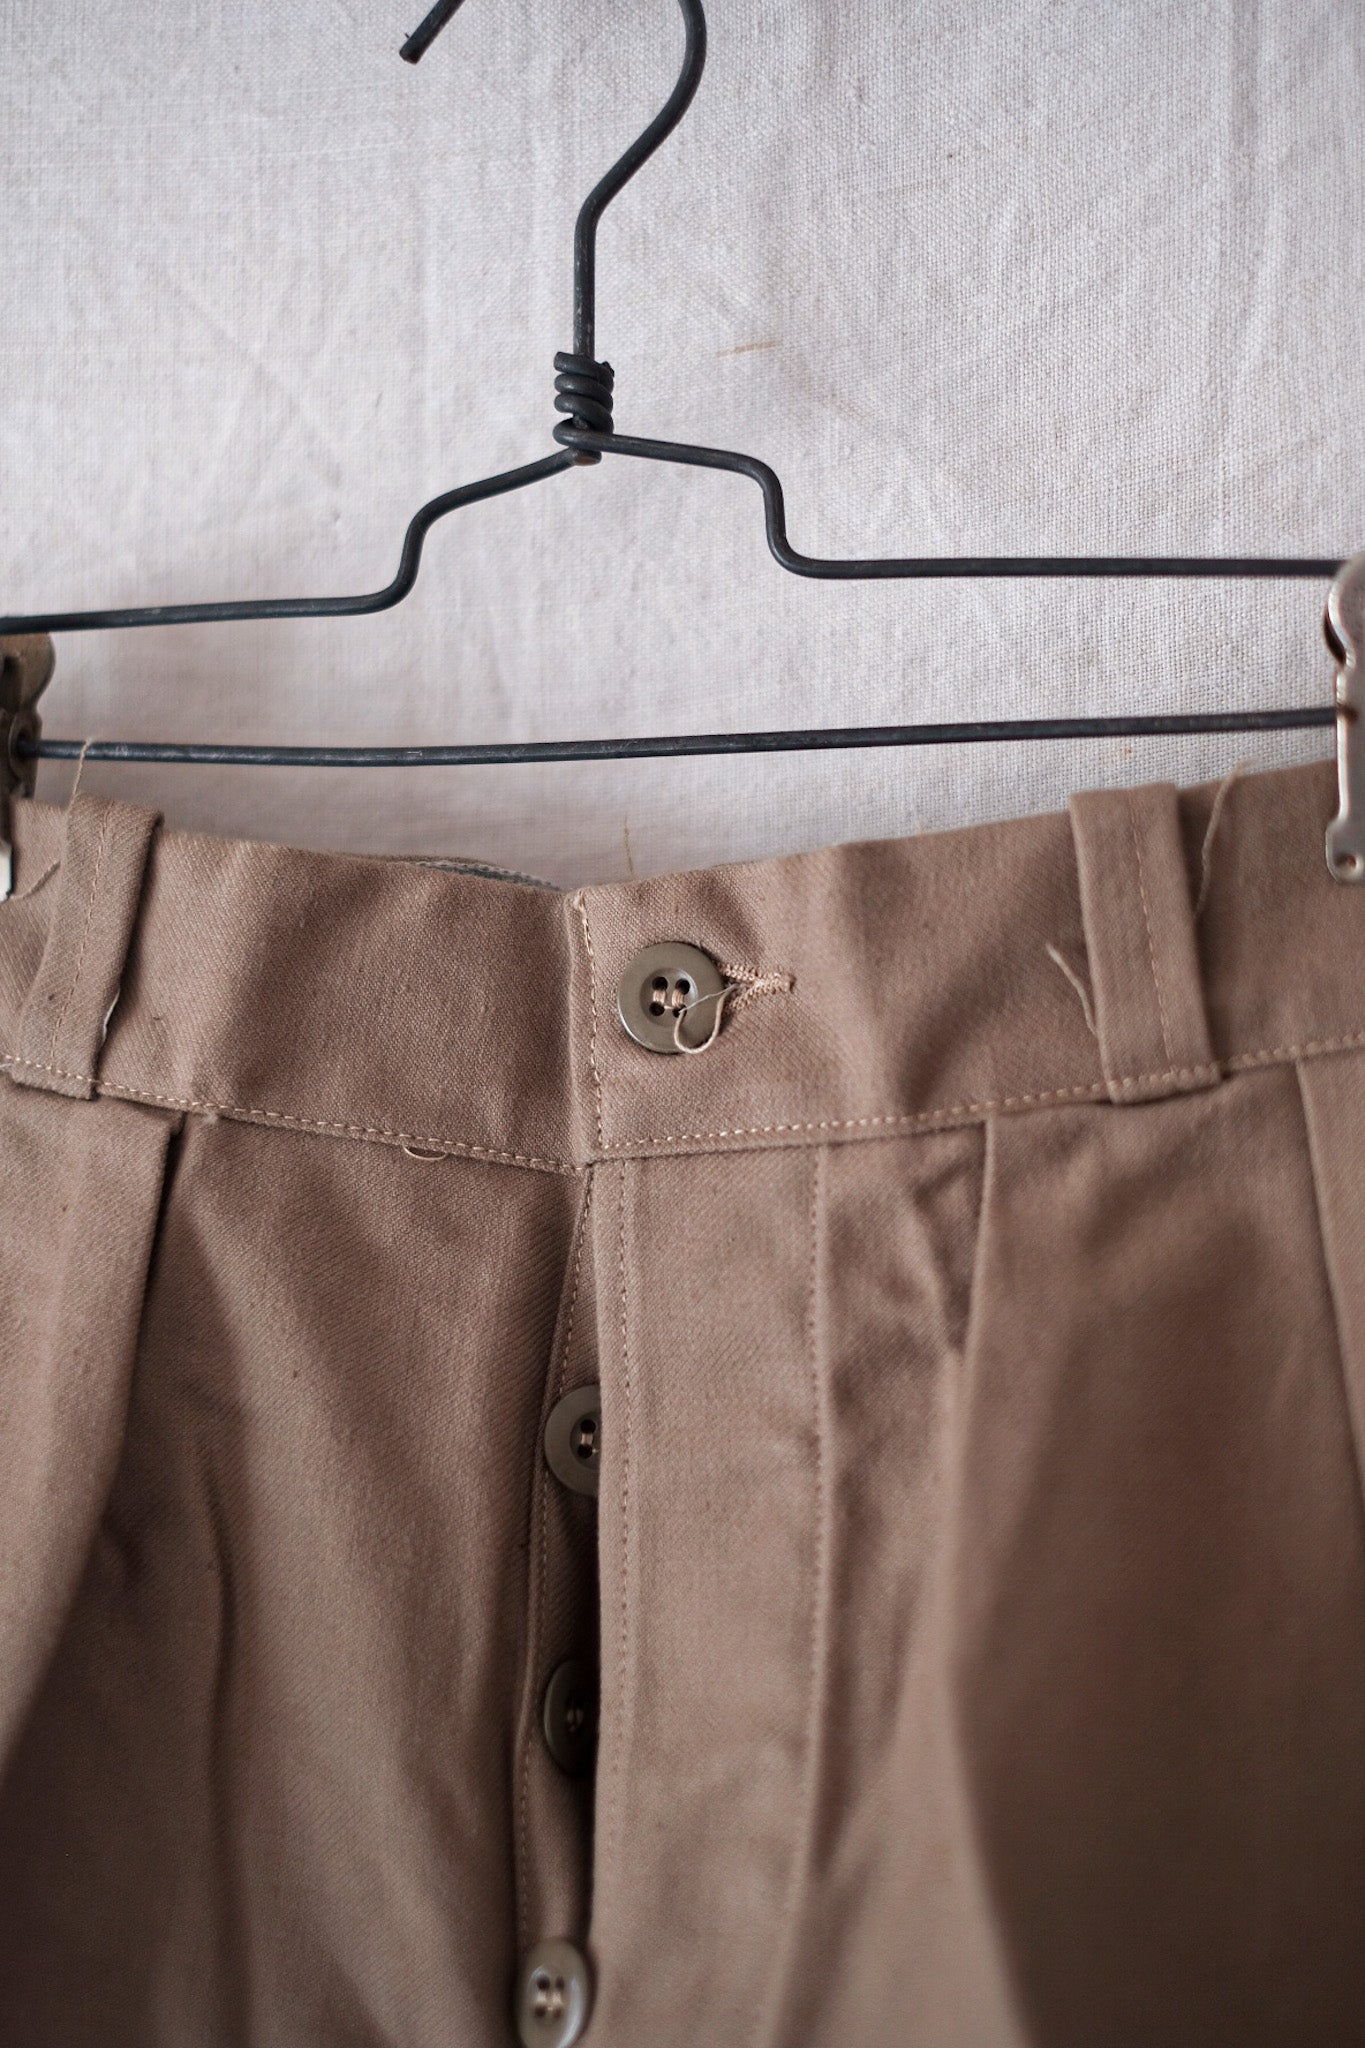 [~ 50's] French Vintage Chino Shorts "DEAD STOCK"